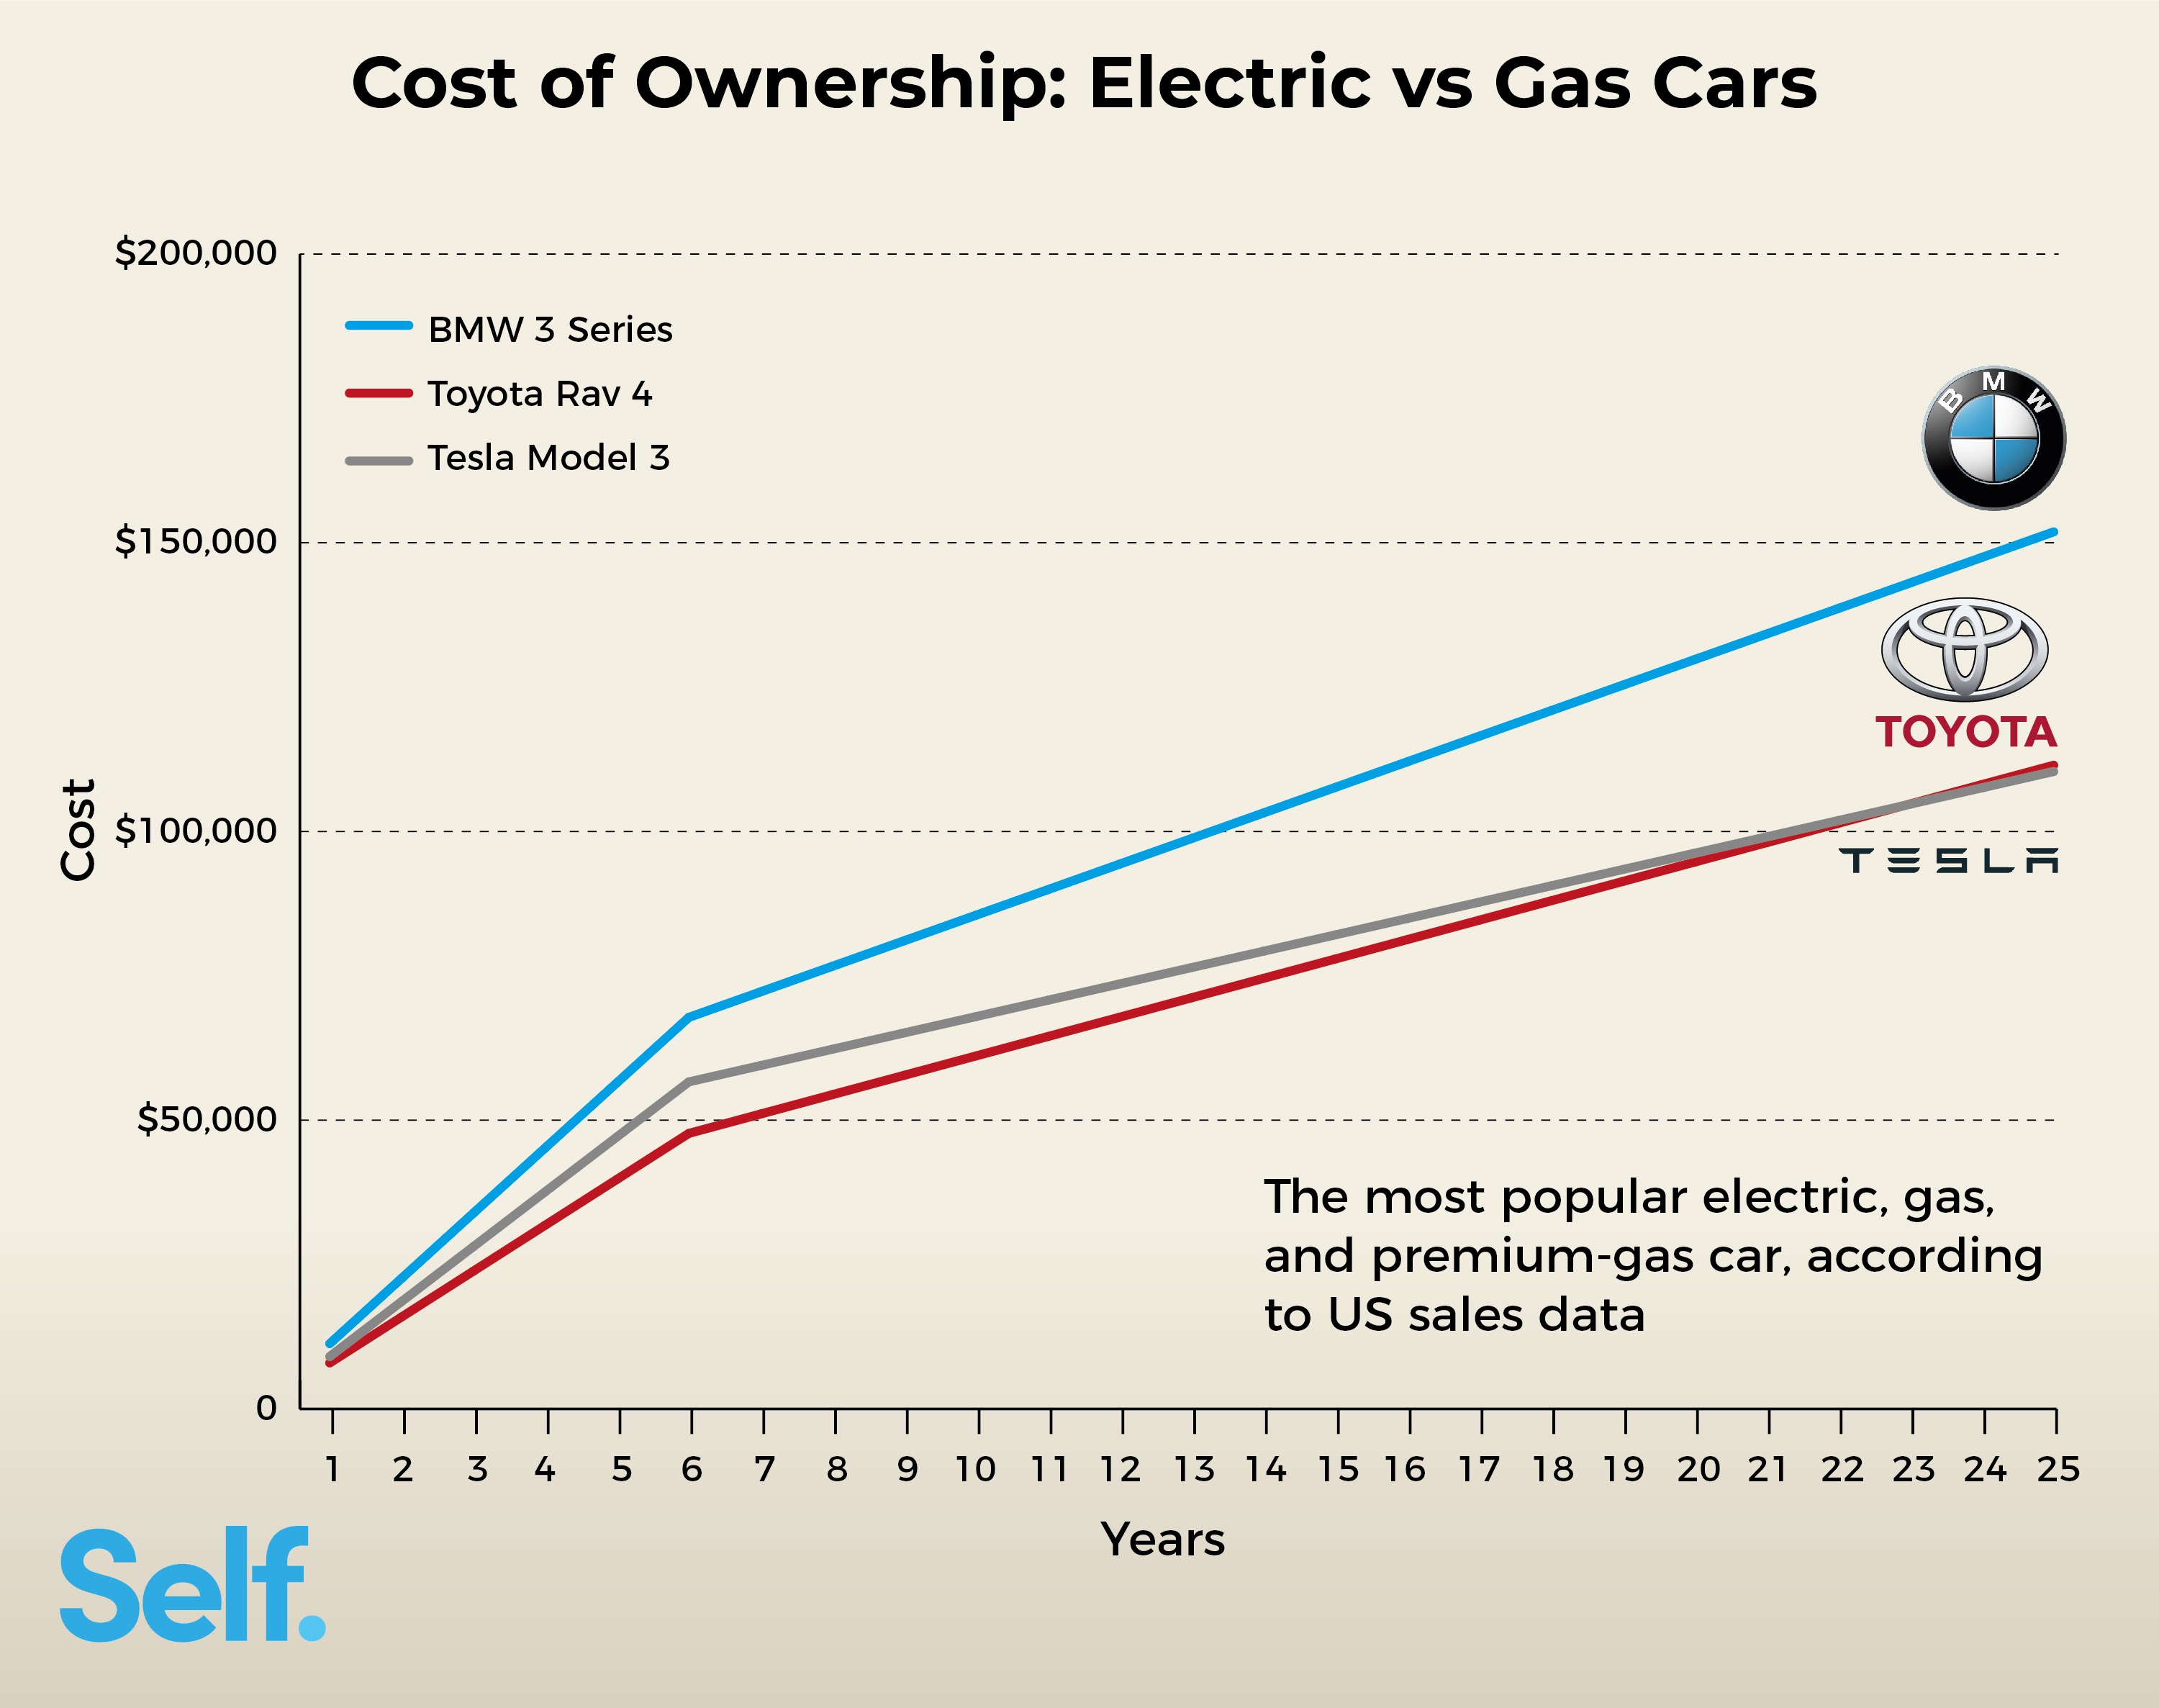 Electric Vehicles Cost $634 Less To Run Per Year